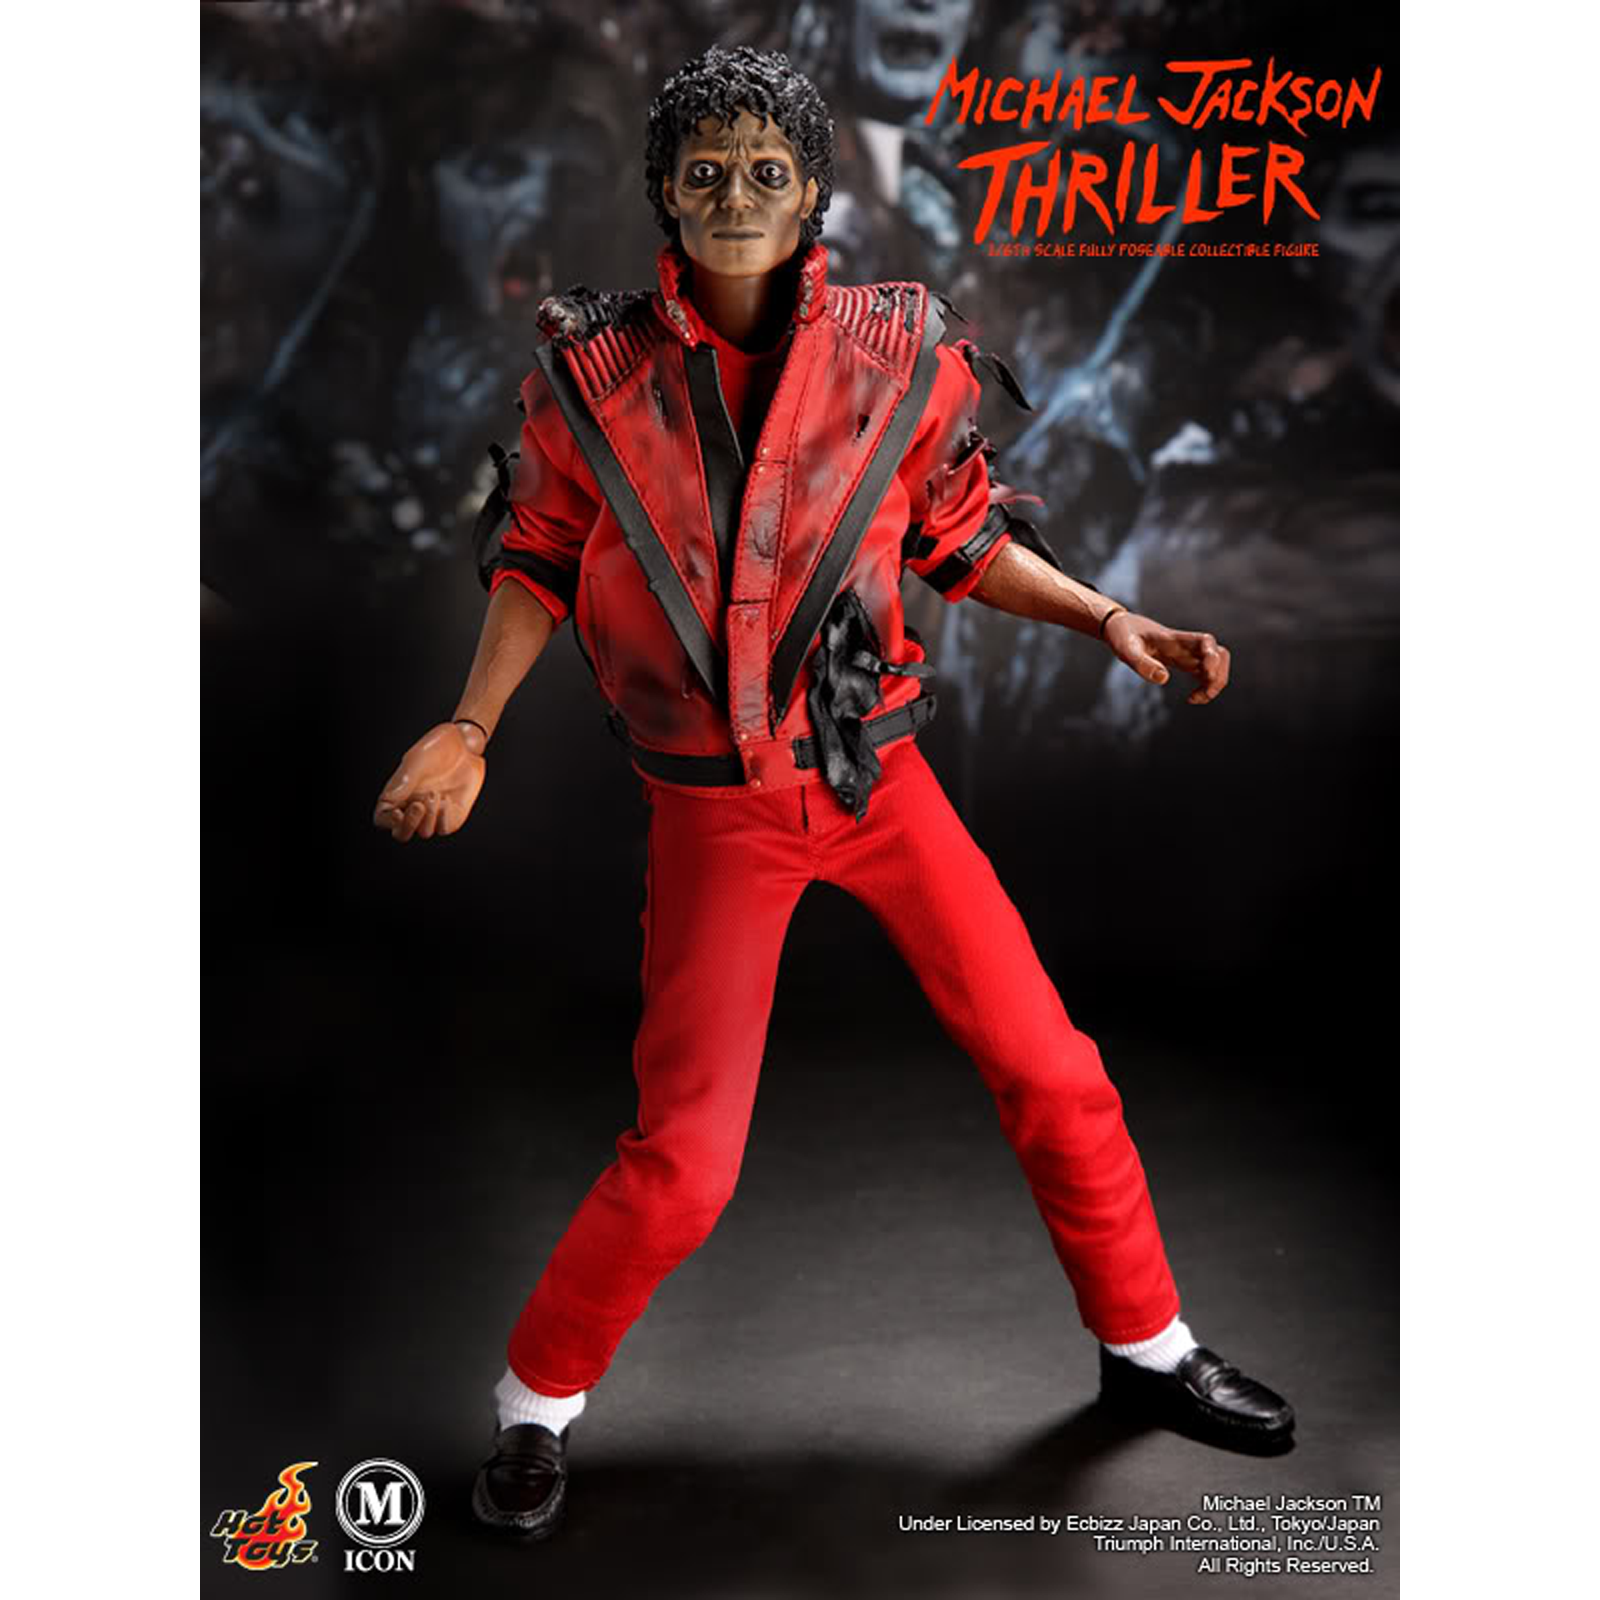 Michael Jackson (Thriller) Sixth Scale Figure by Hot Toys